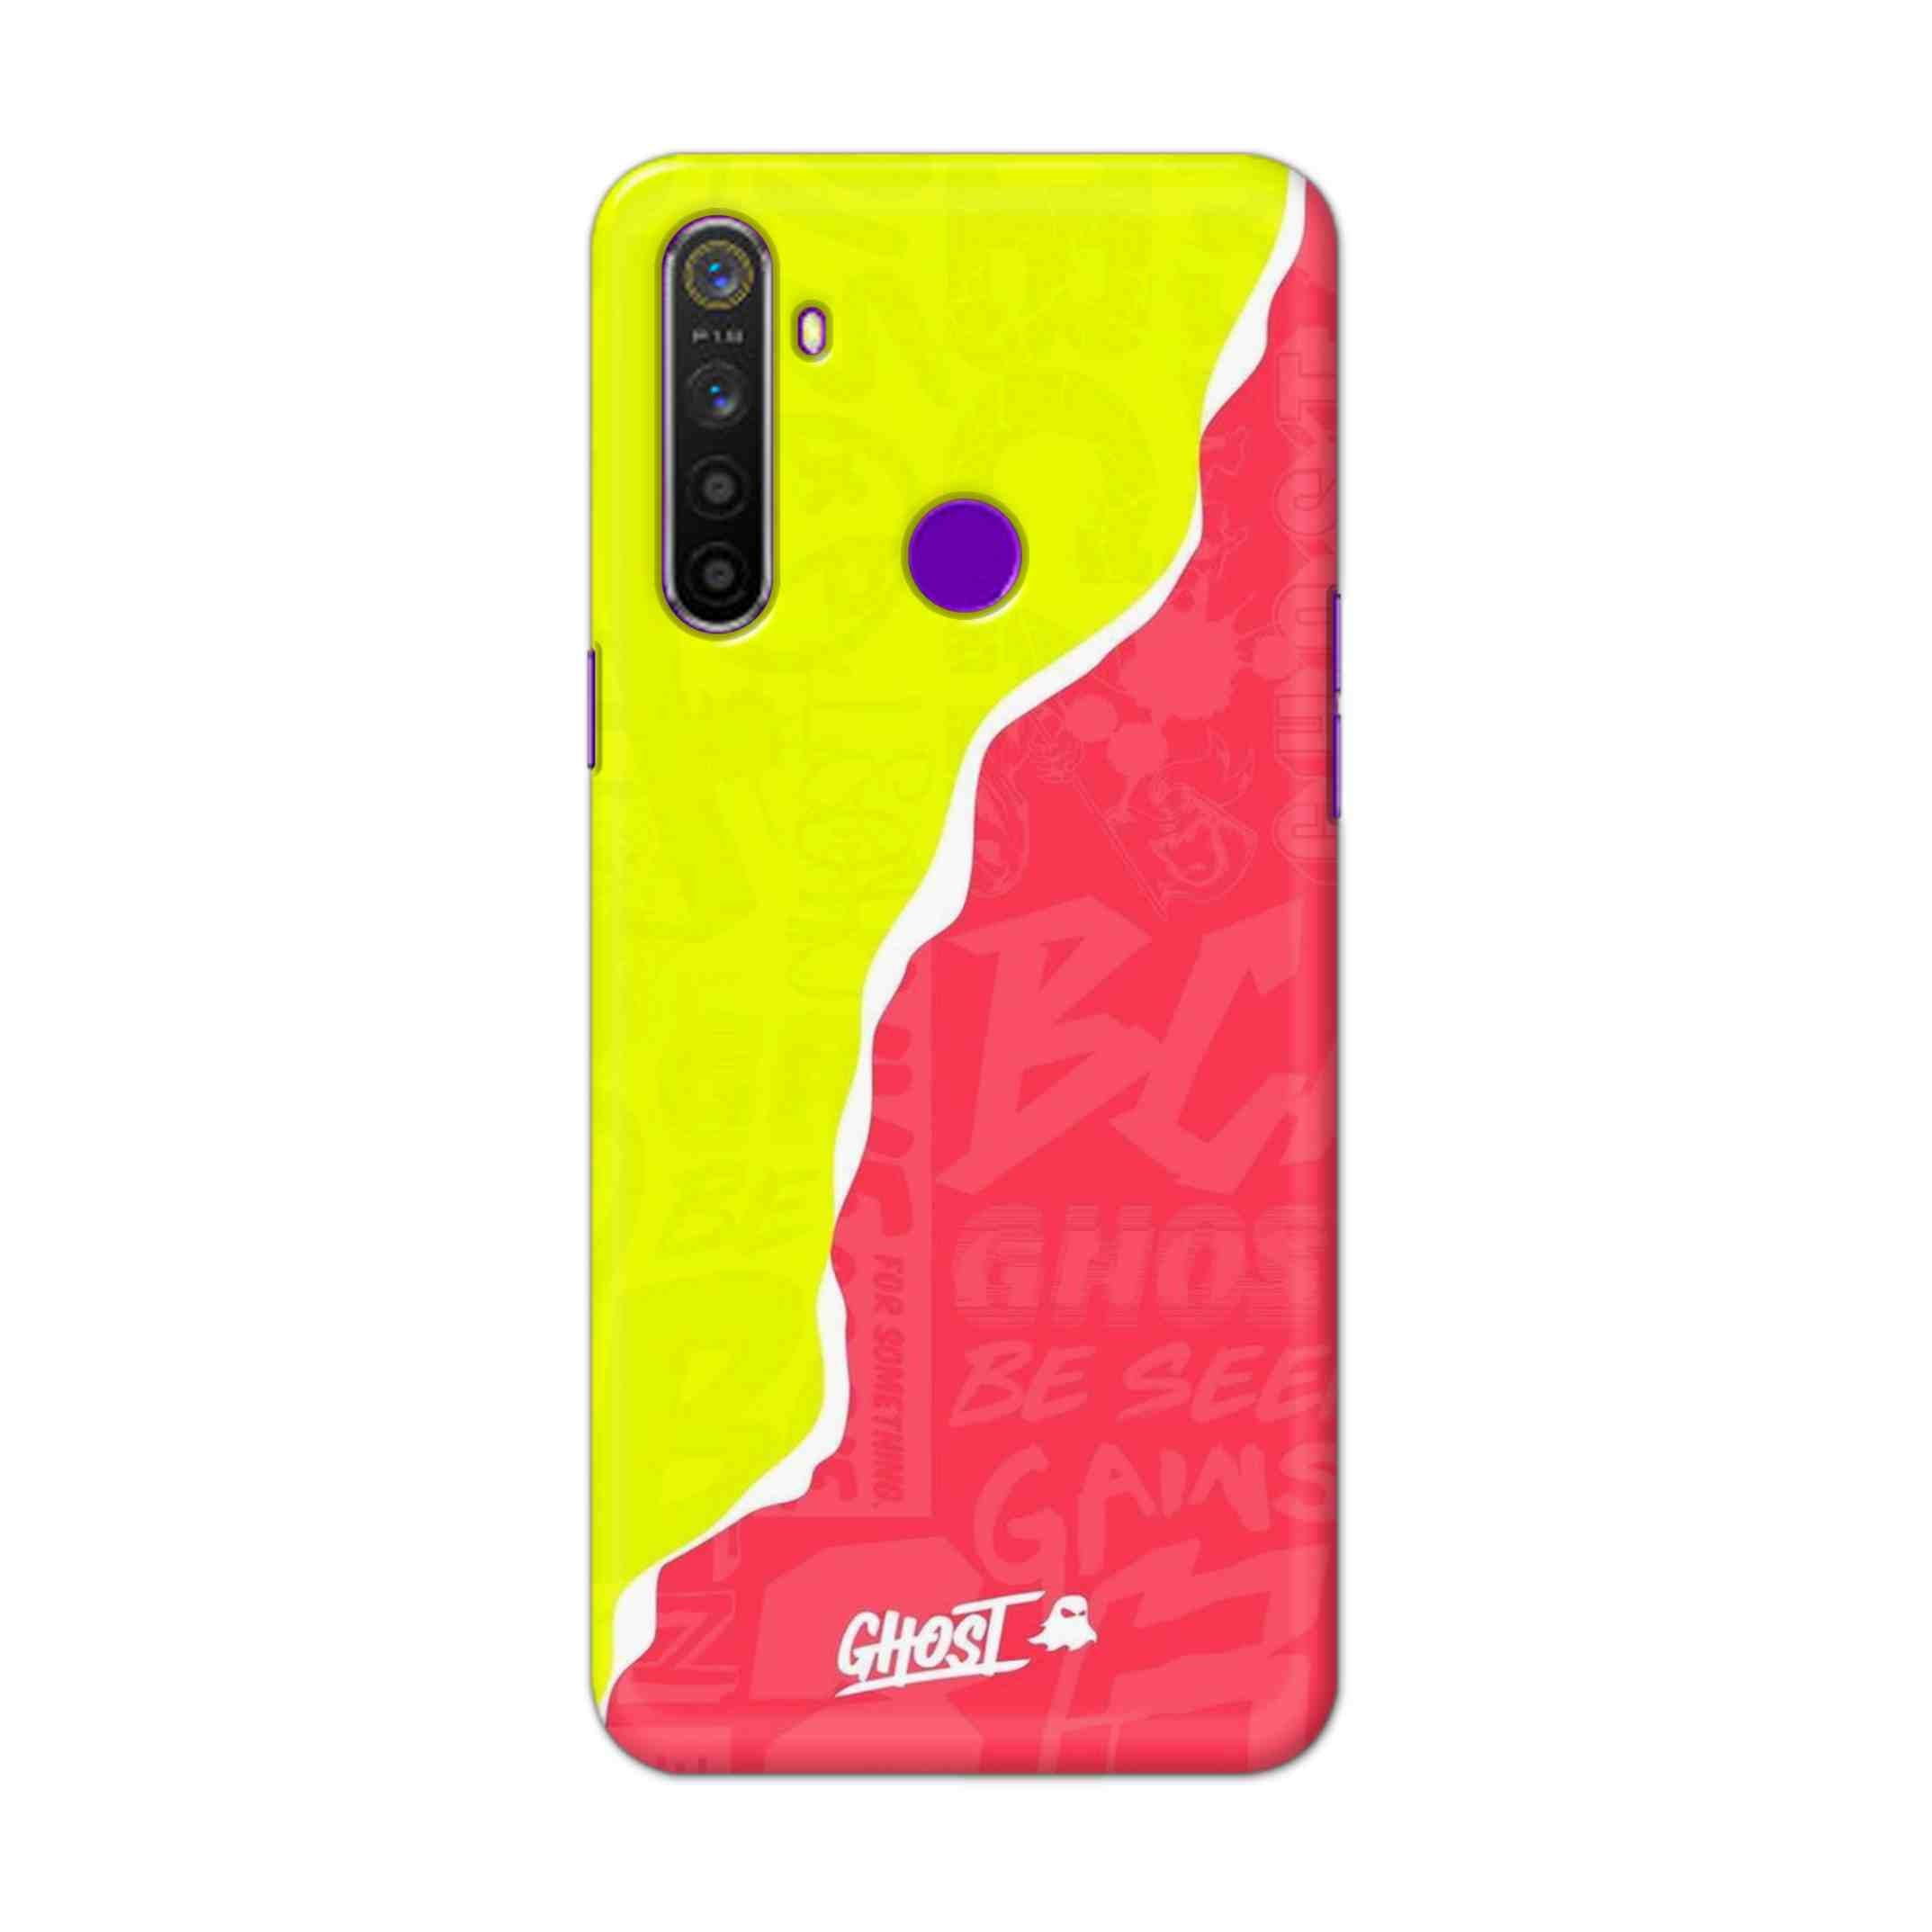 Buy Ghost Hard Back Mobile Phone Case Cover For Realme 5 Pro Online